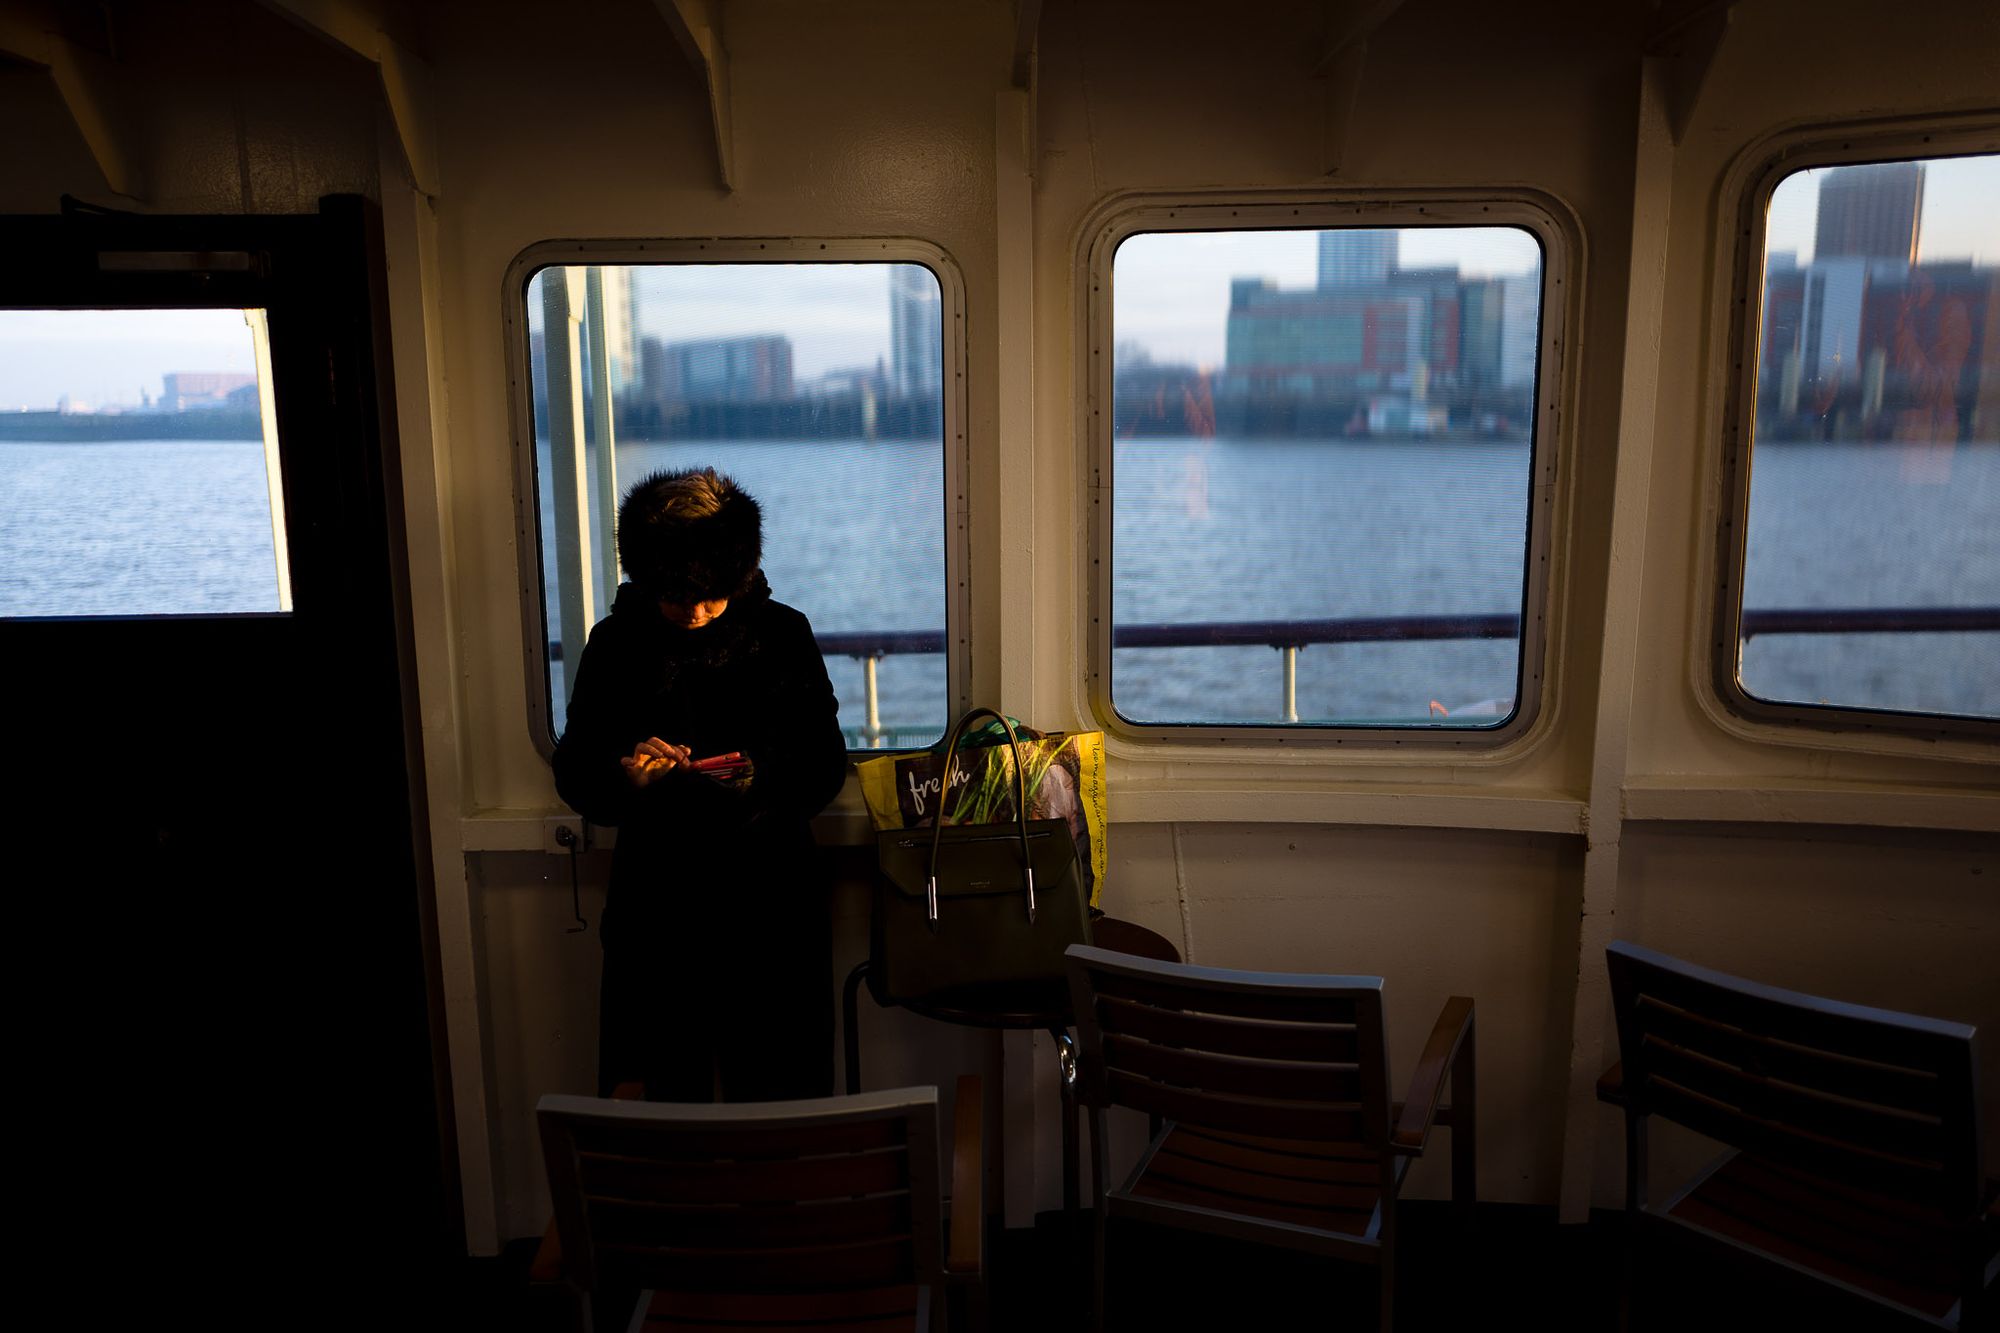 A woman uses her phone while the morning ferry sails into Liverpool